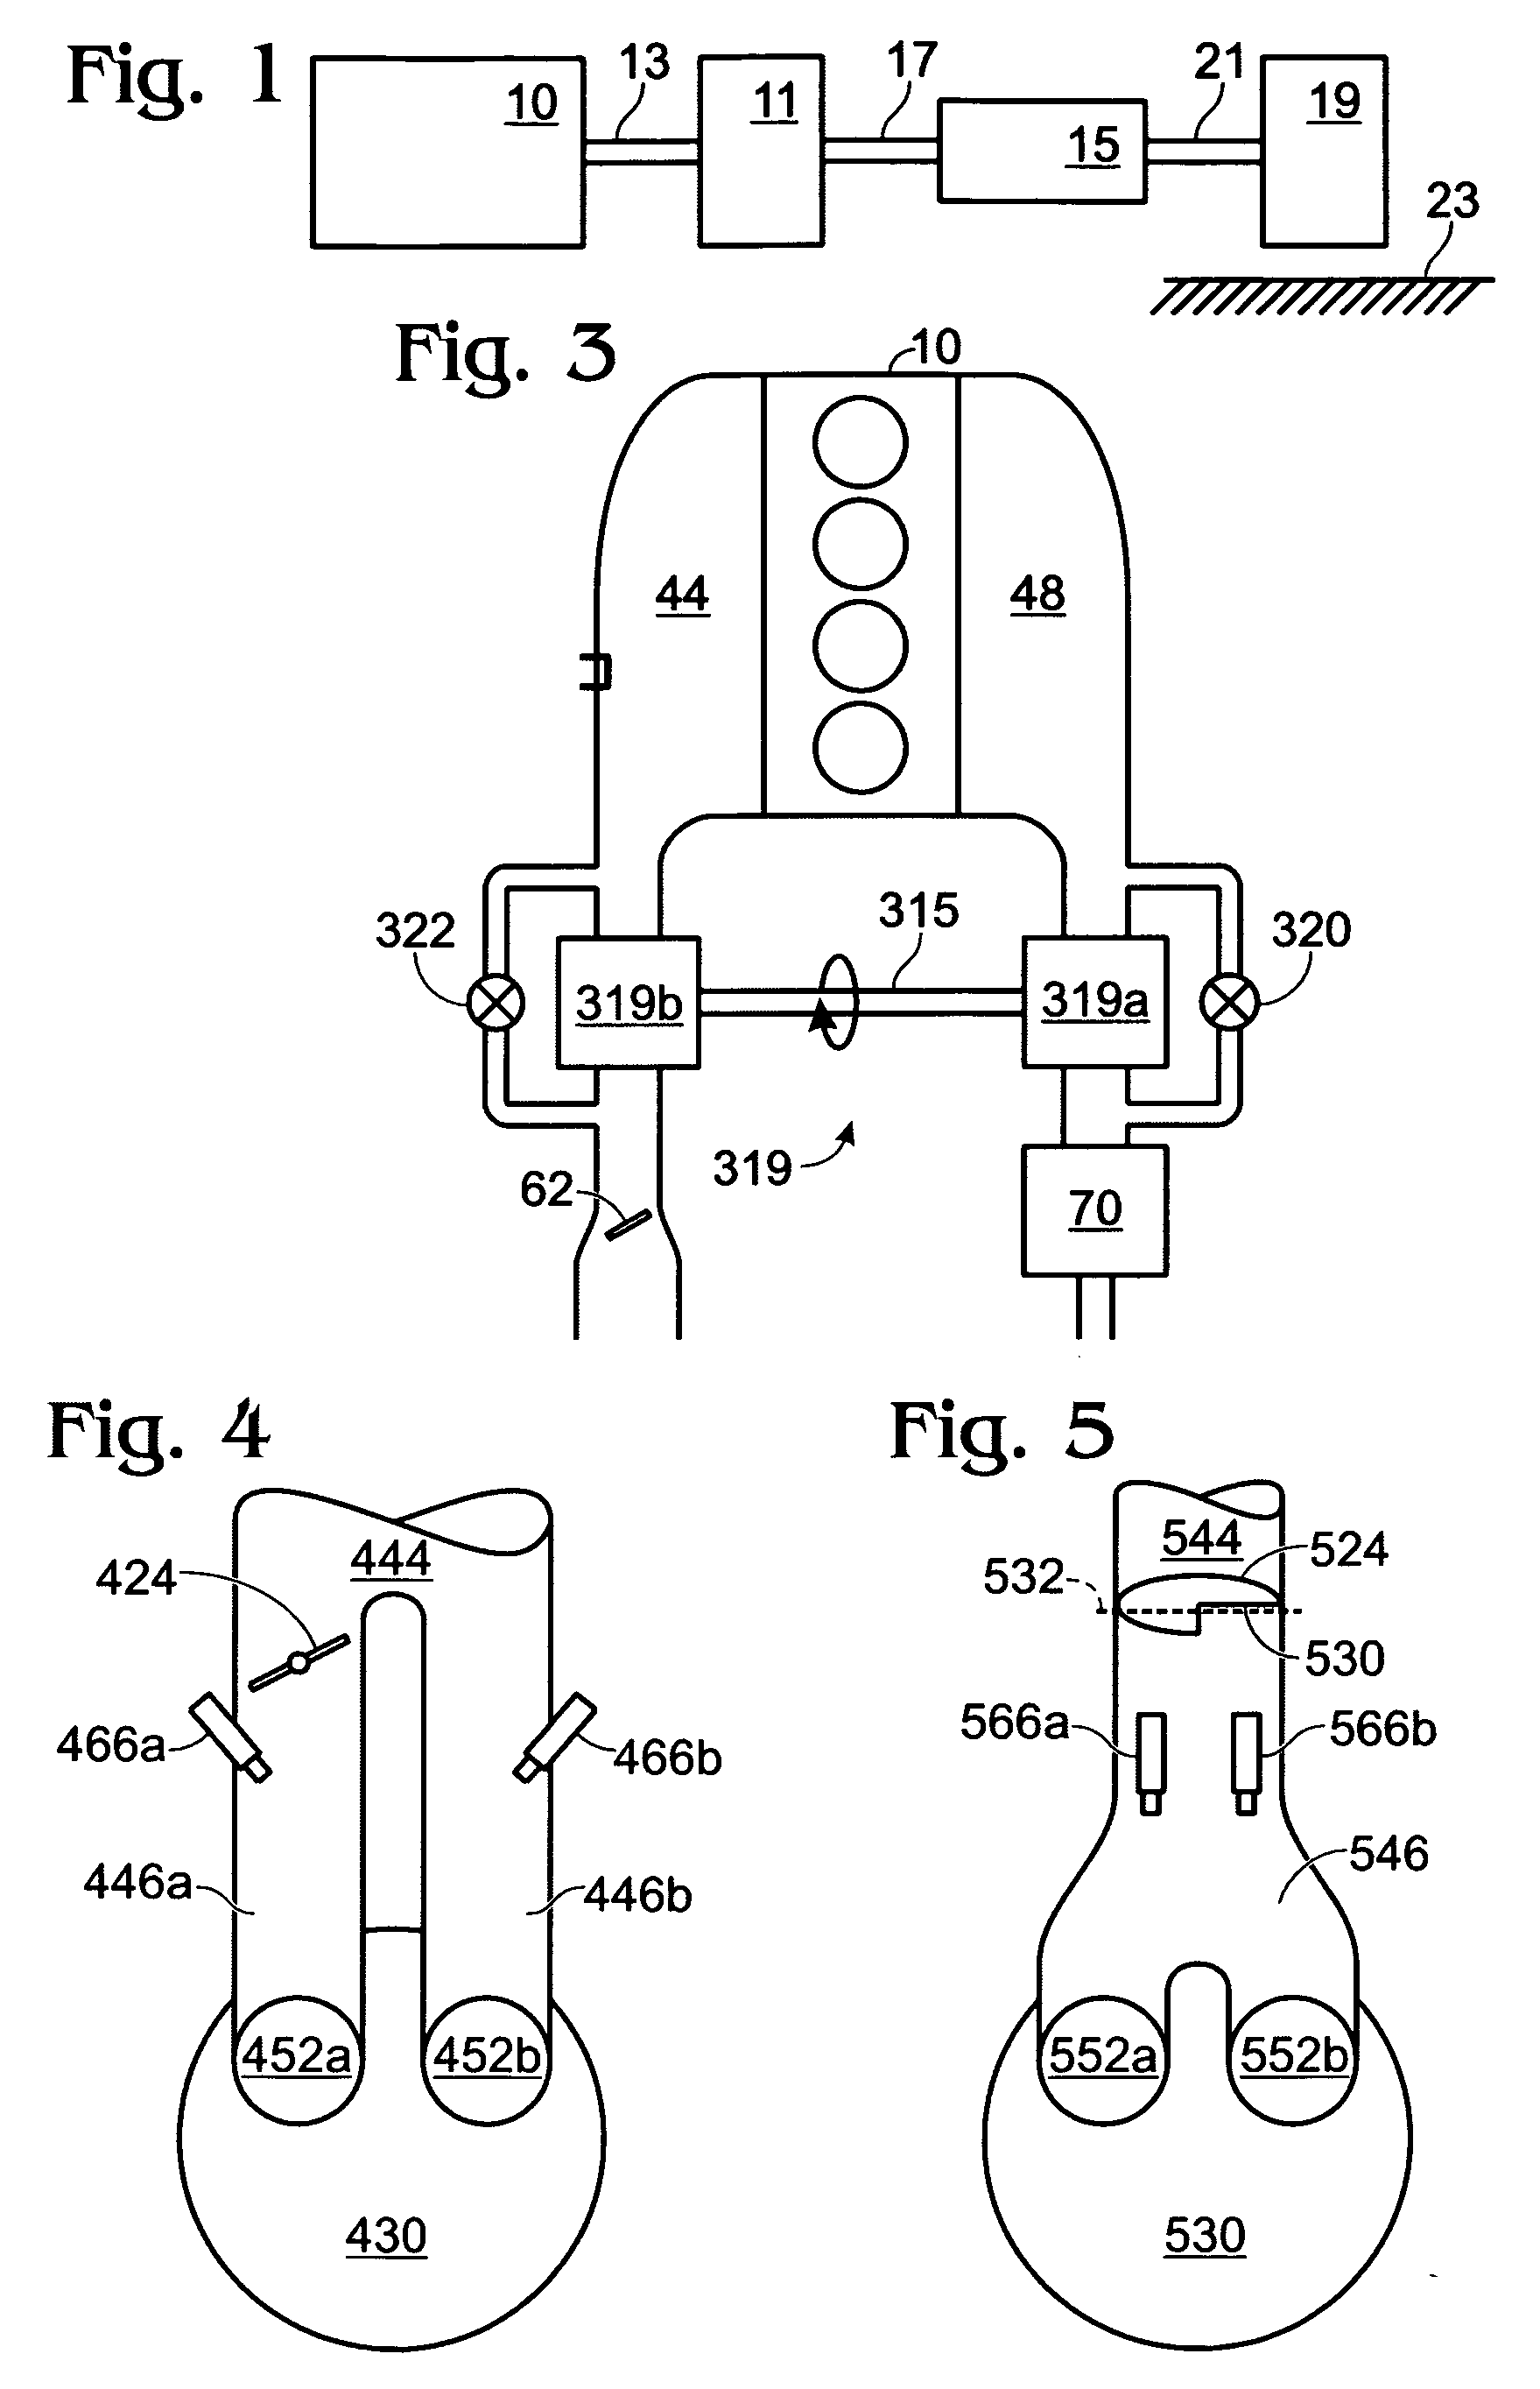 Event based engine control system and method